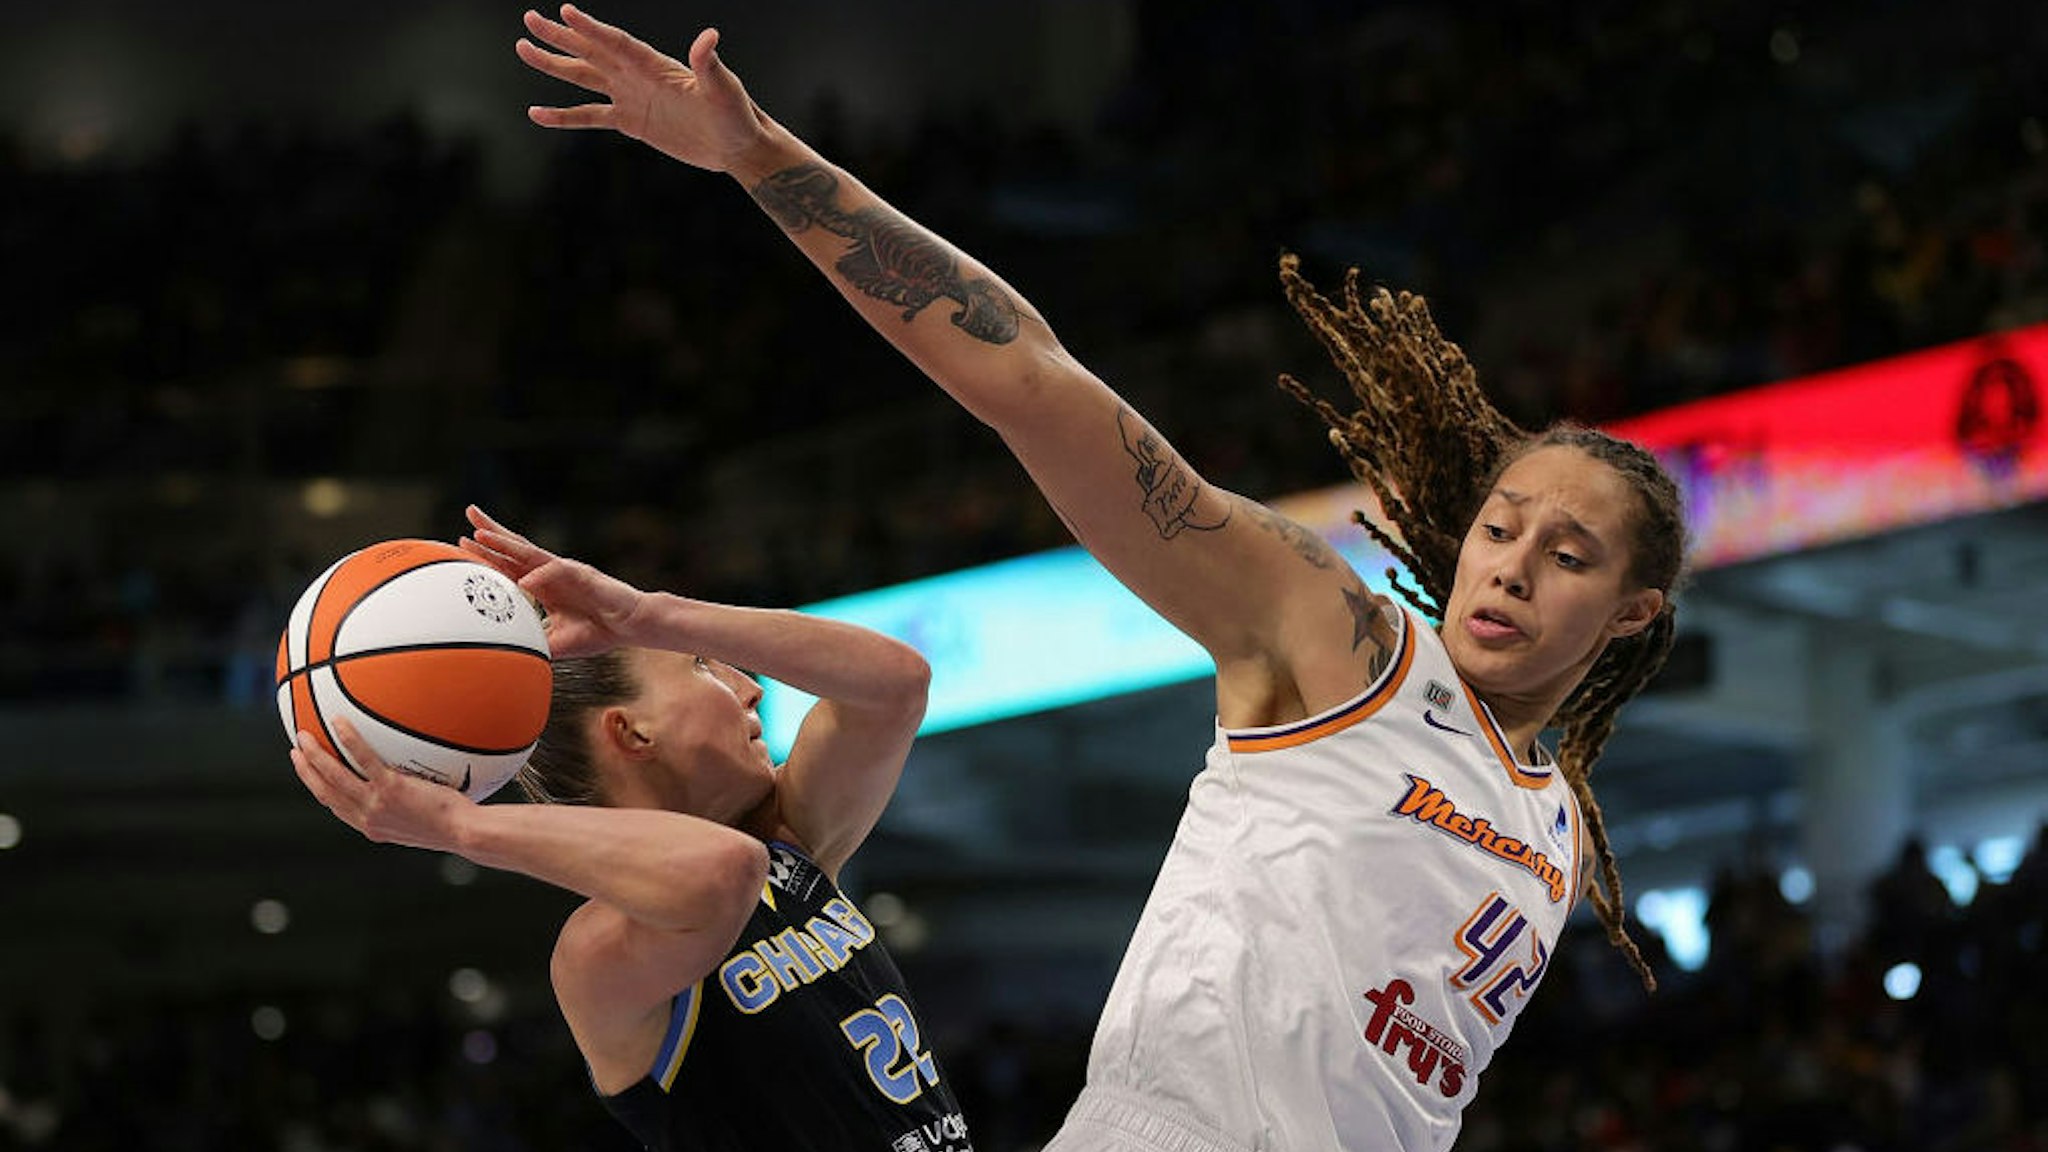 CHICAGO, ILLINOIS - OCTOBER 17: Courtney Vandersloot #22 of the Chicago Sky drives to the basket against Brittney Griner #42 of the Phoenix Mercury during Game Four of the WNBA Finals at Wintrust Arena on October 17, 2021 in Chicago, Illinois. NOTE TO USER: User expressly acknowledges and agrees that, by downloading and or using this photograph, User is consenting to the terms and conditions of the Getty Images License Agreement. (Photo by Stacy Revere/Getty Images)